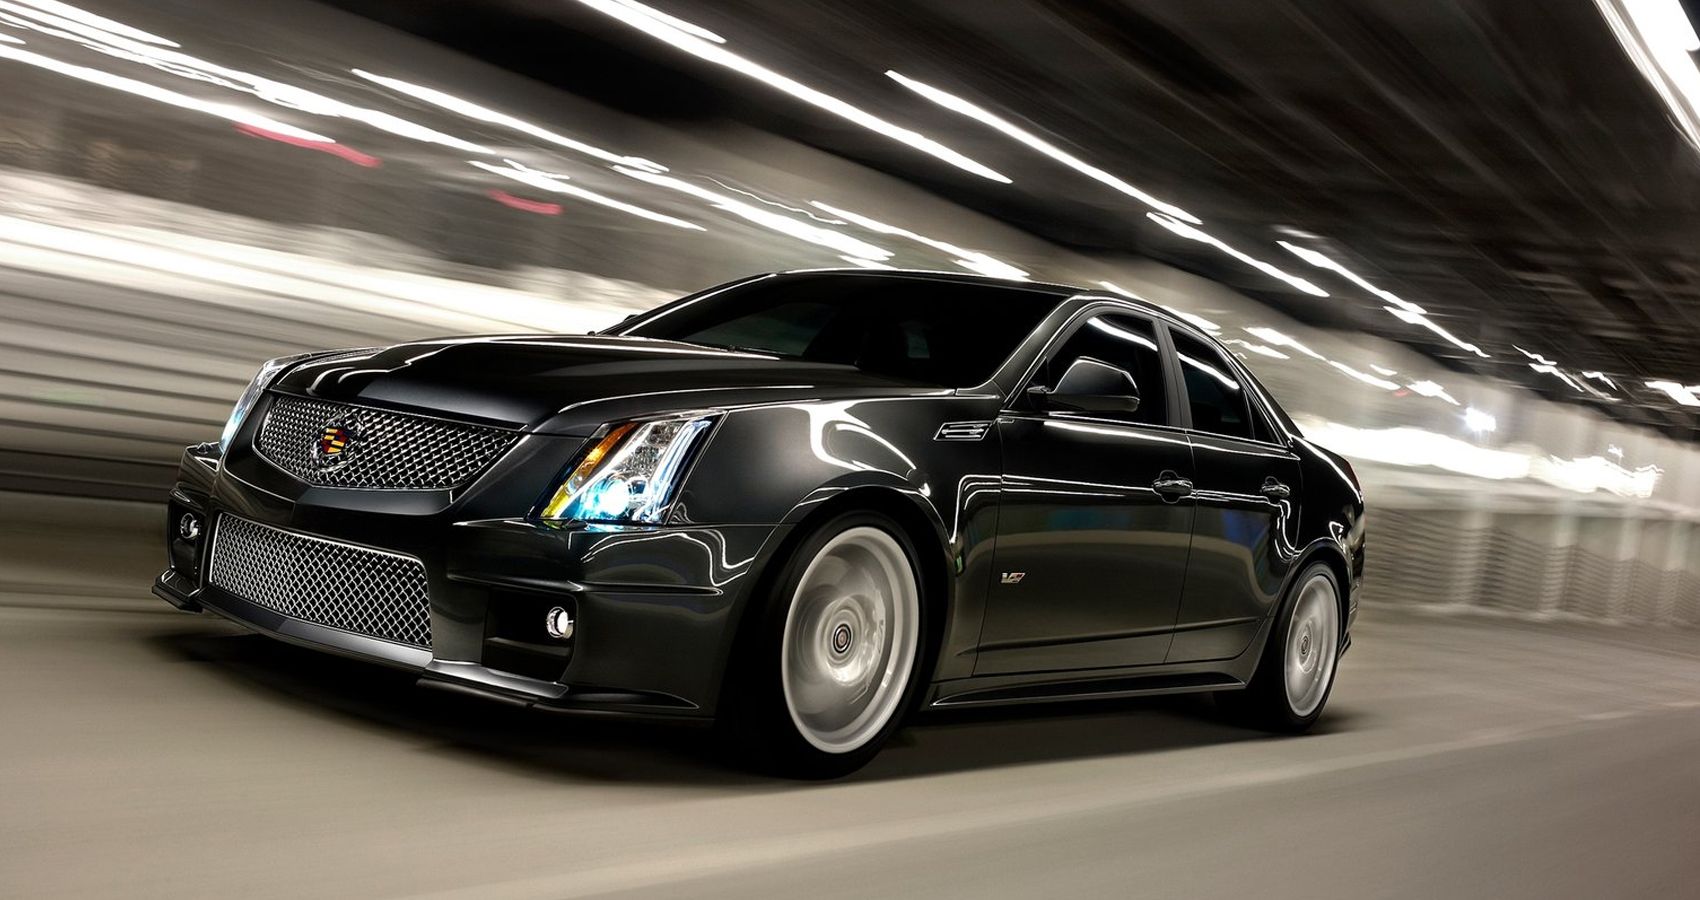 Front 3/4 view of a gray CTS-V speeding through a tunnel, long exposure shot